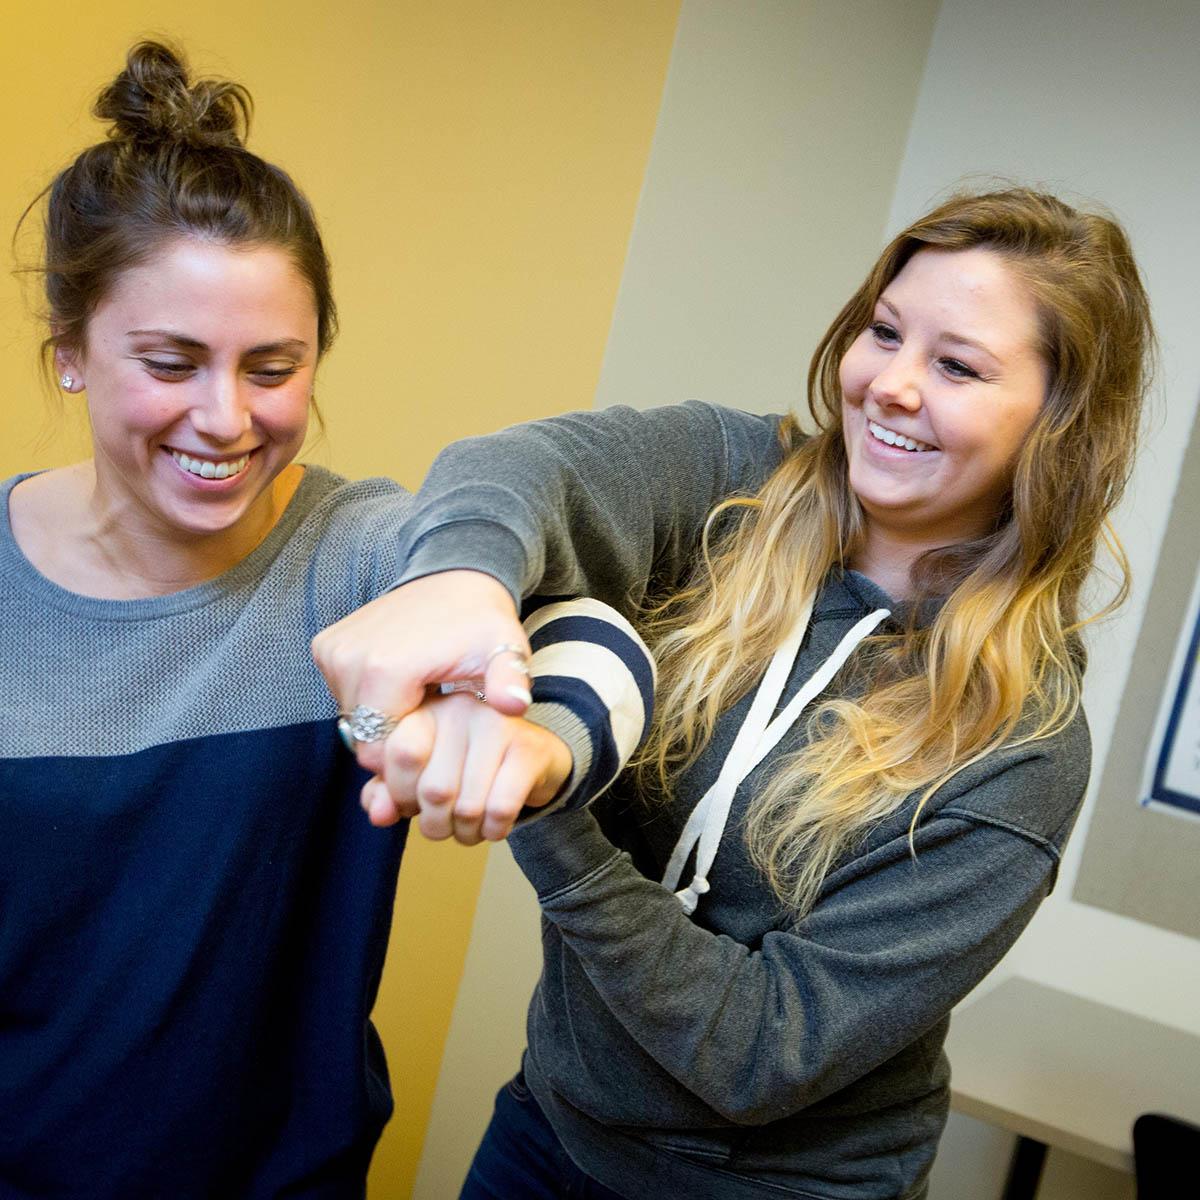 Photo of two occupational therapy students smiling and working together